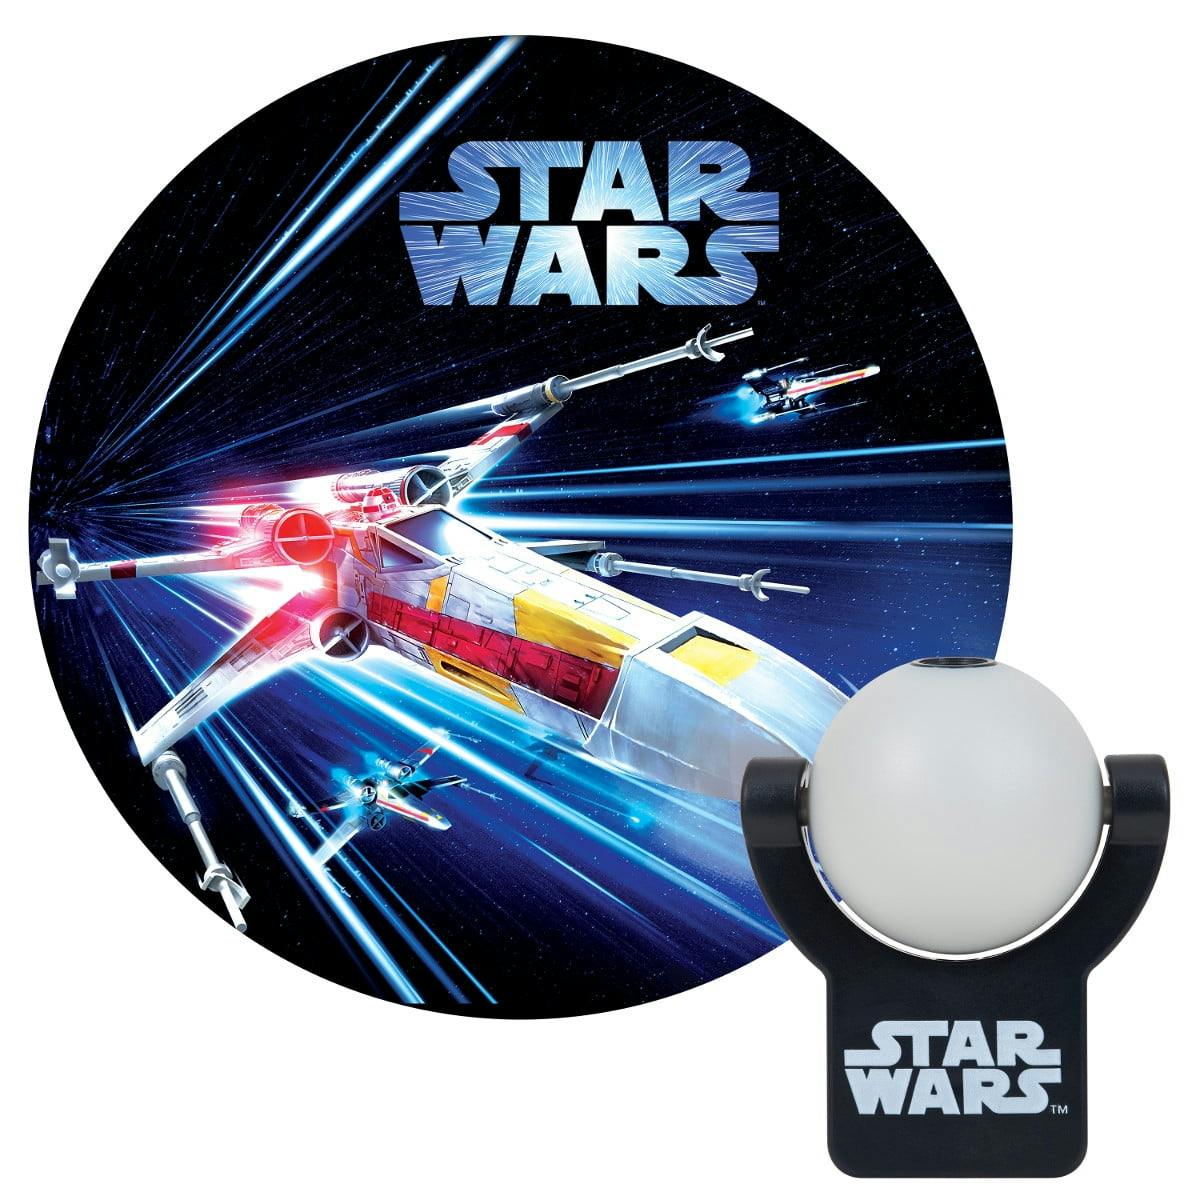 Star Wars X-Wing Fighter Automatic Projectable Night Light